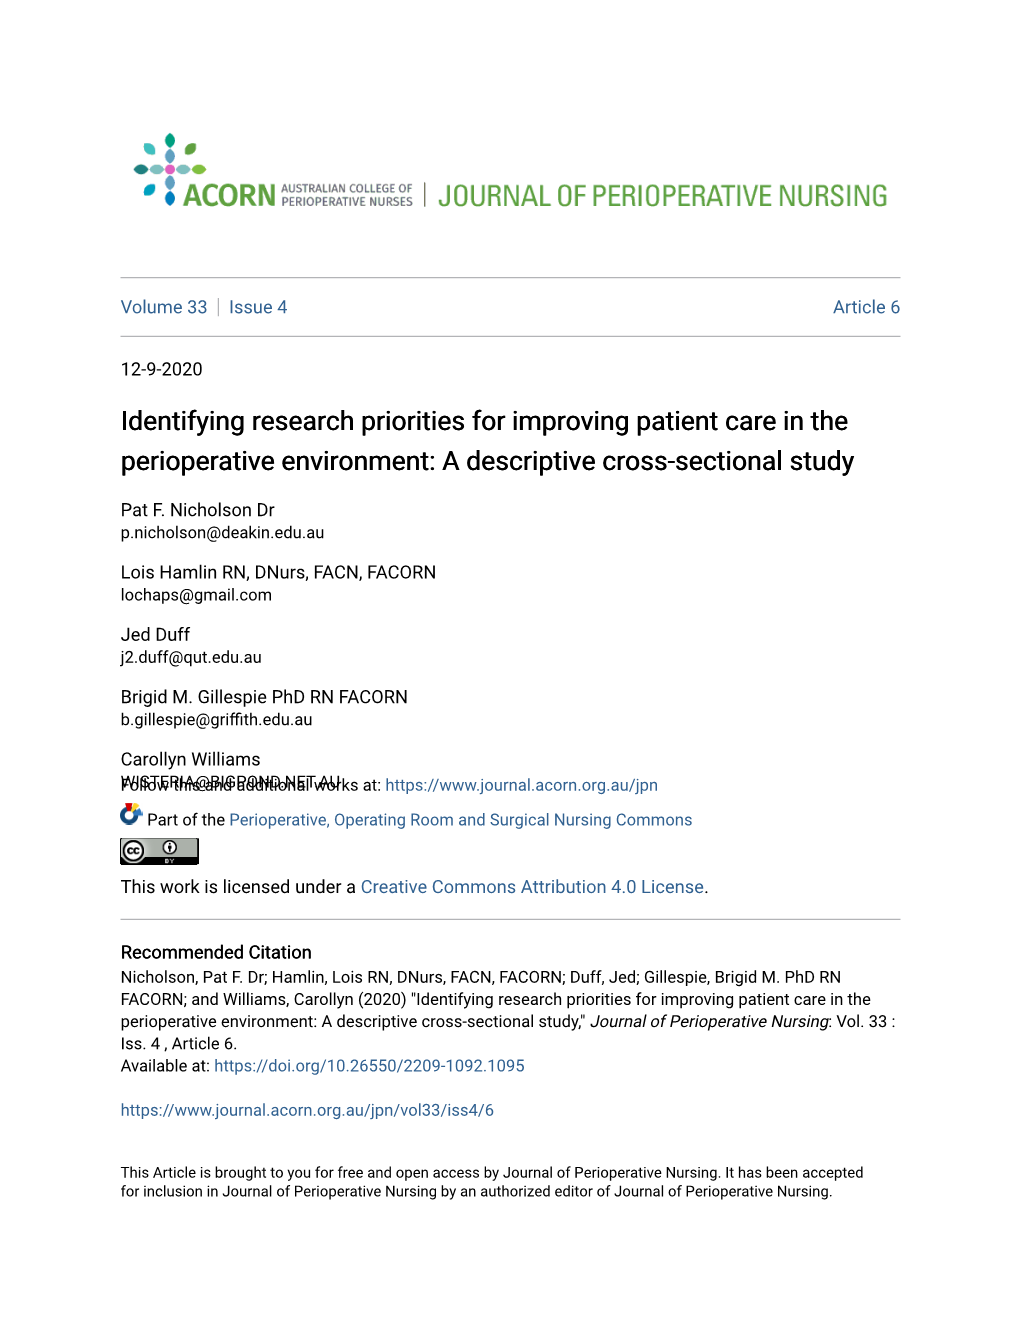 Identifying Research Priorities for Improving Patient Care in the Perioperative Environment: a Descriptive Cross-Sectional Study